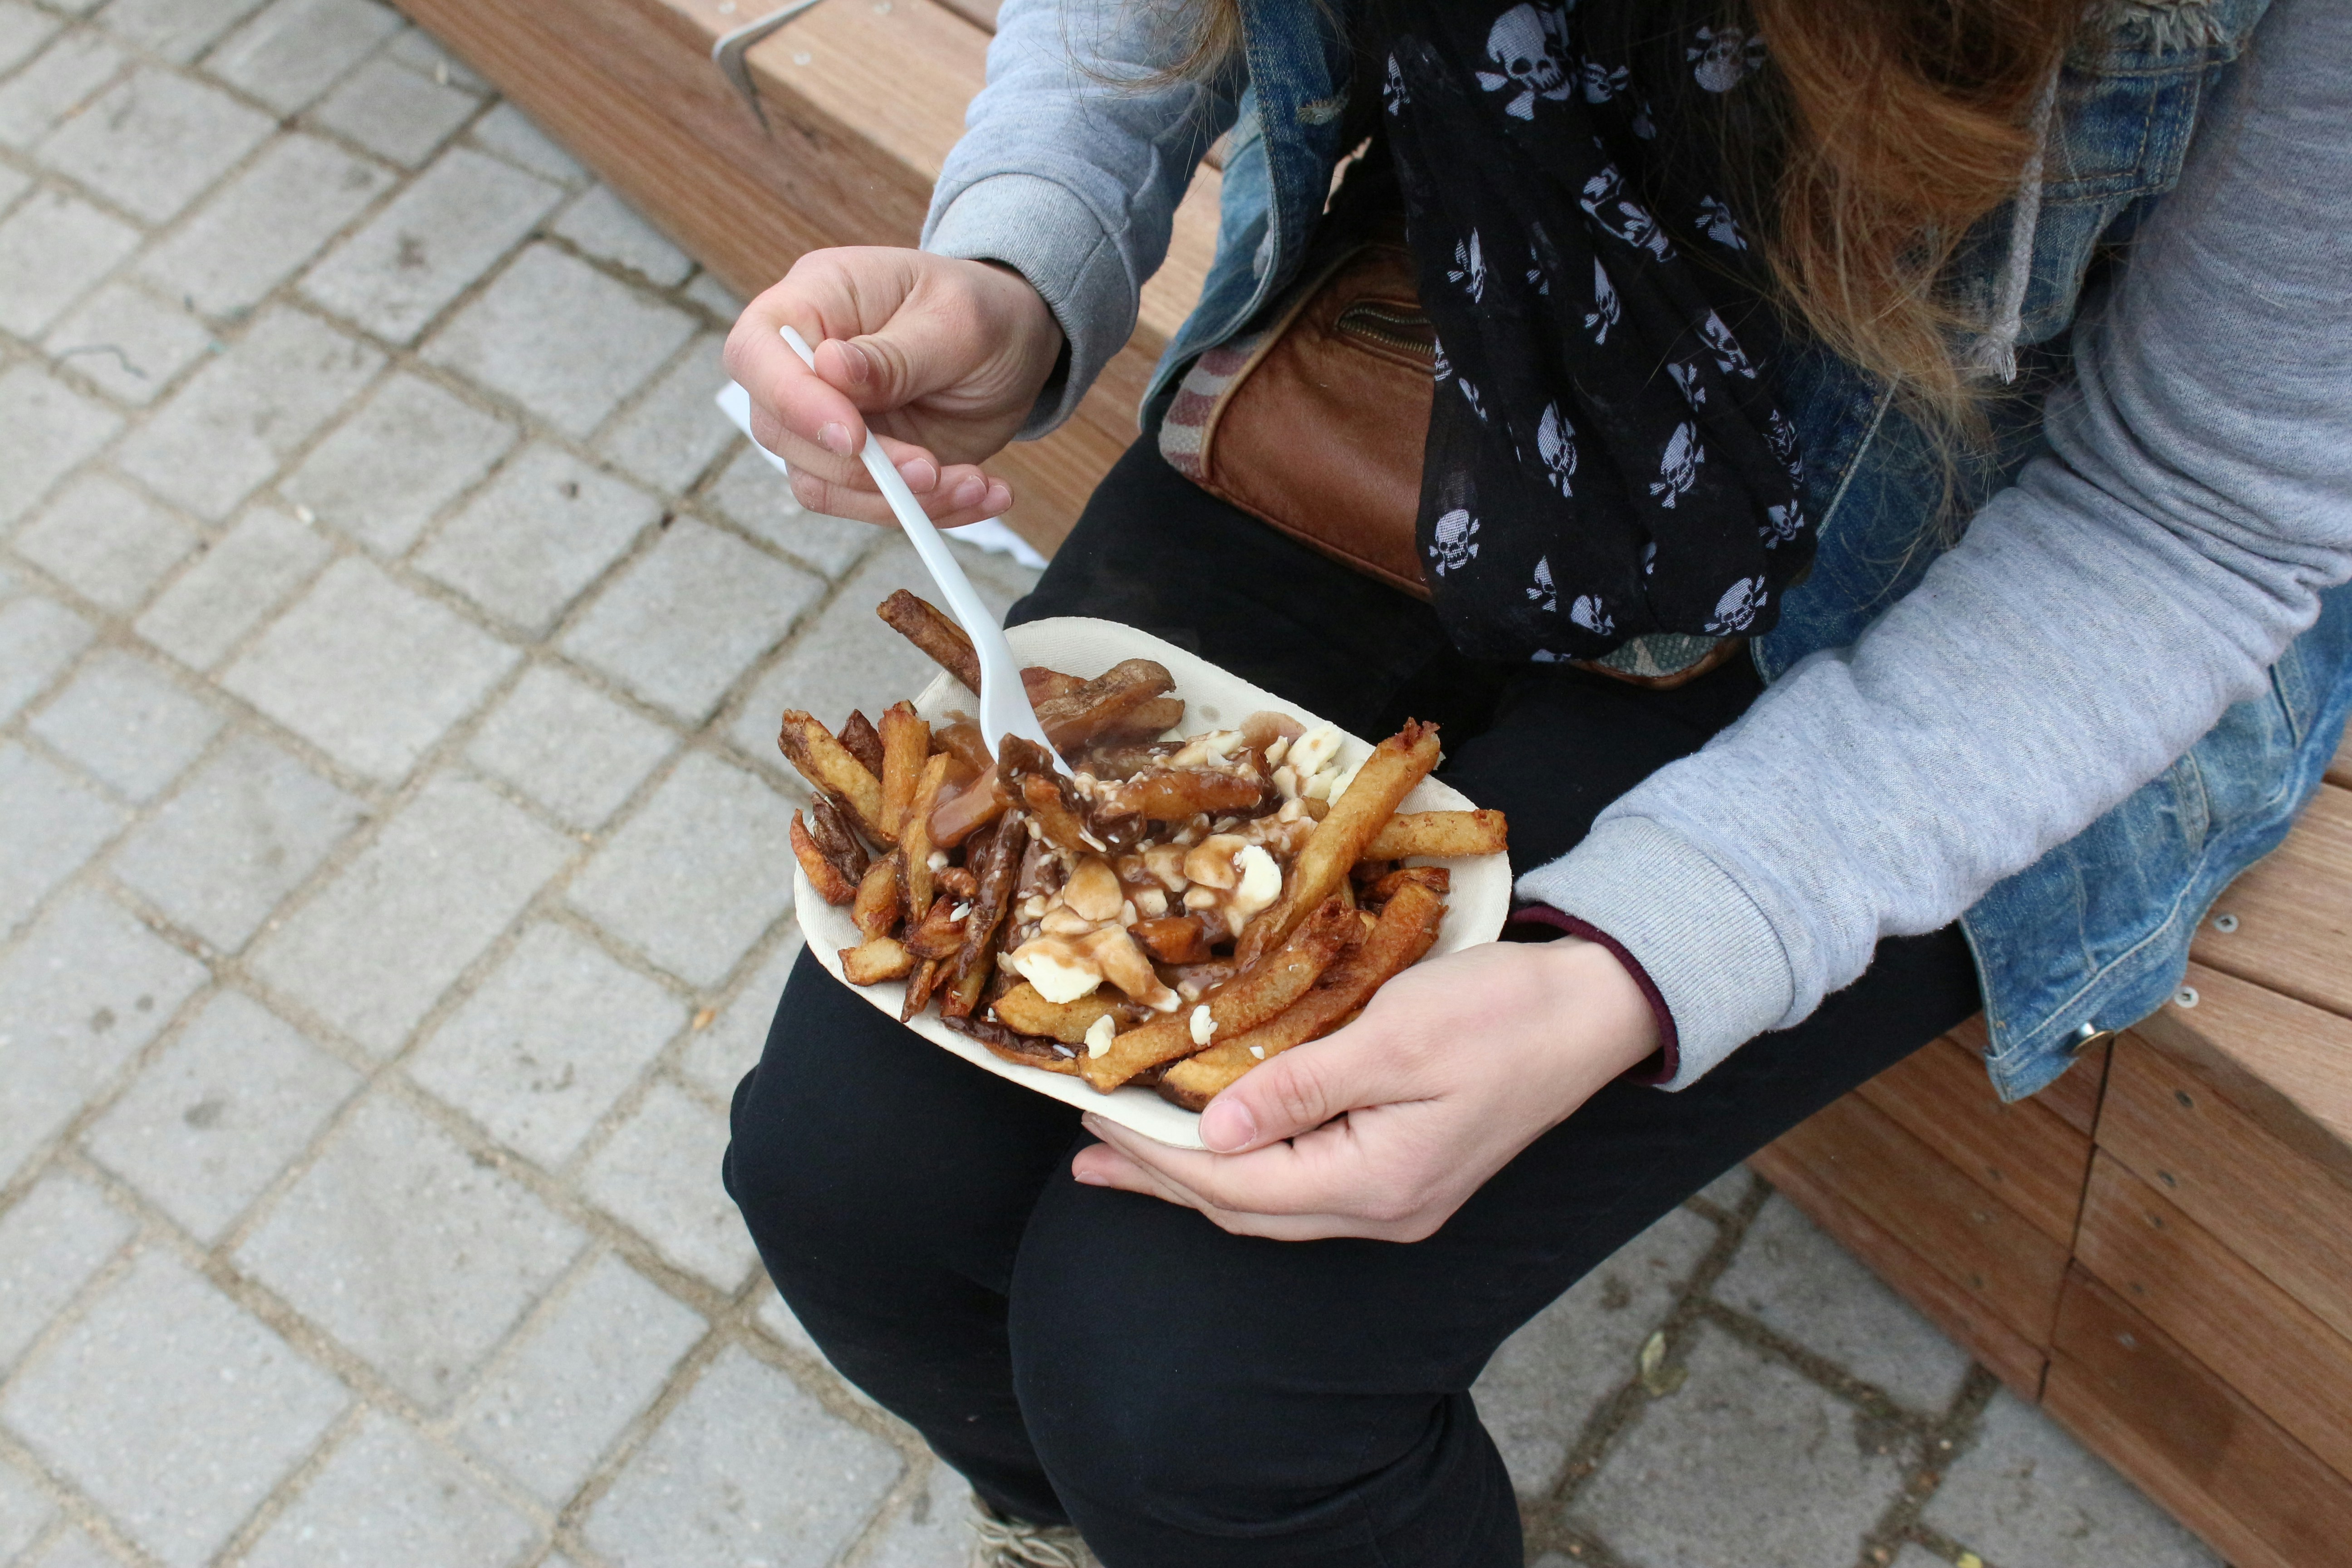 Enjoying Poutine from a Food Truck.